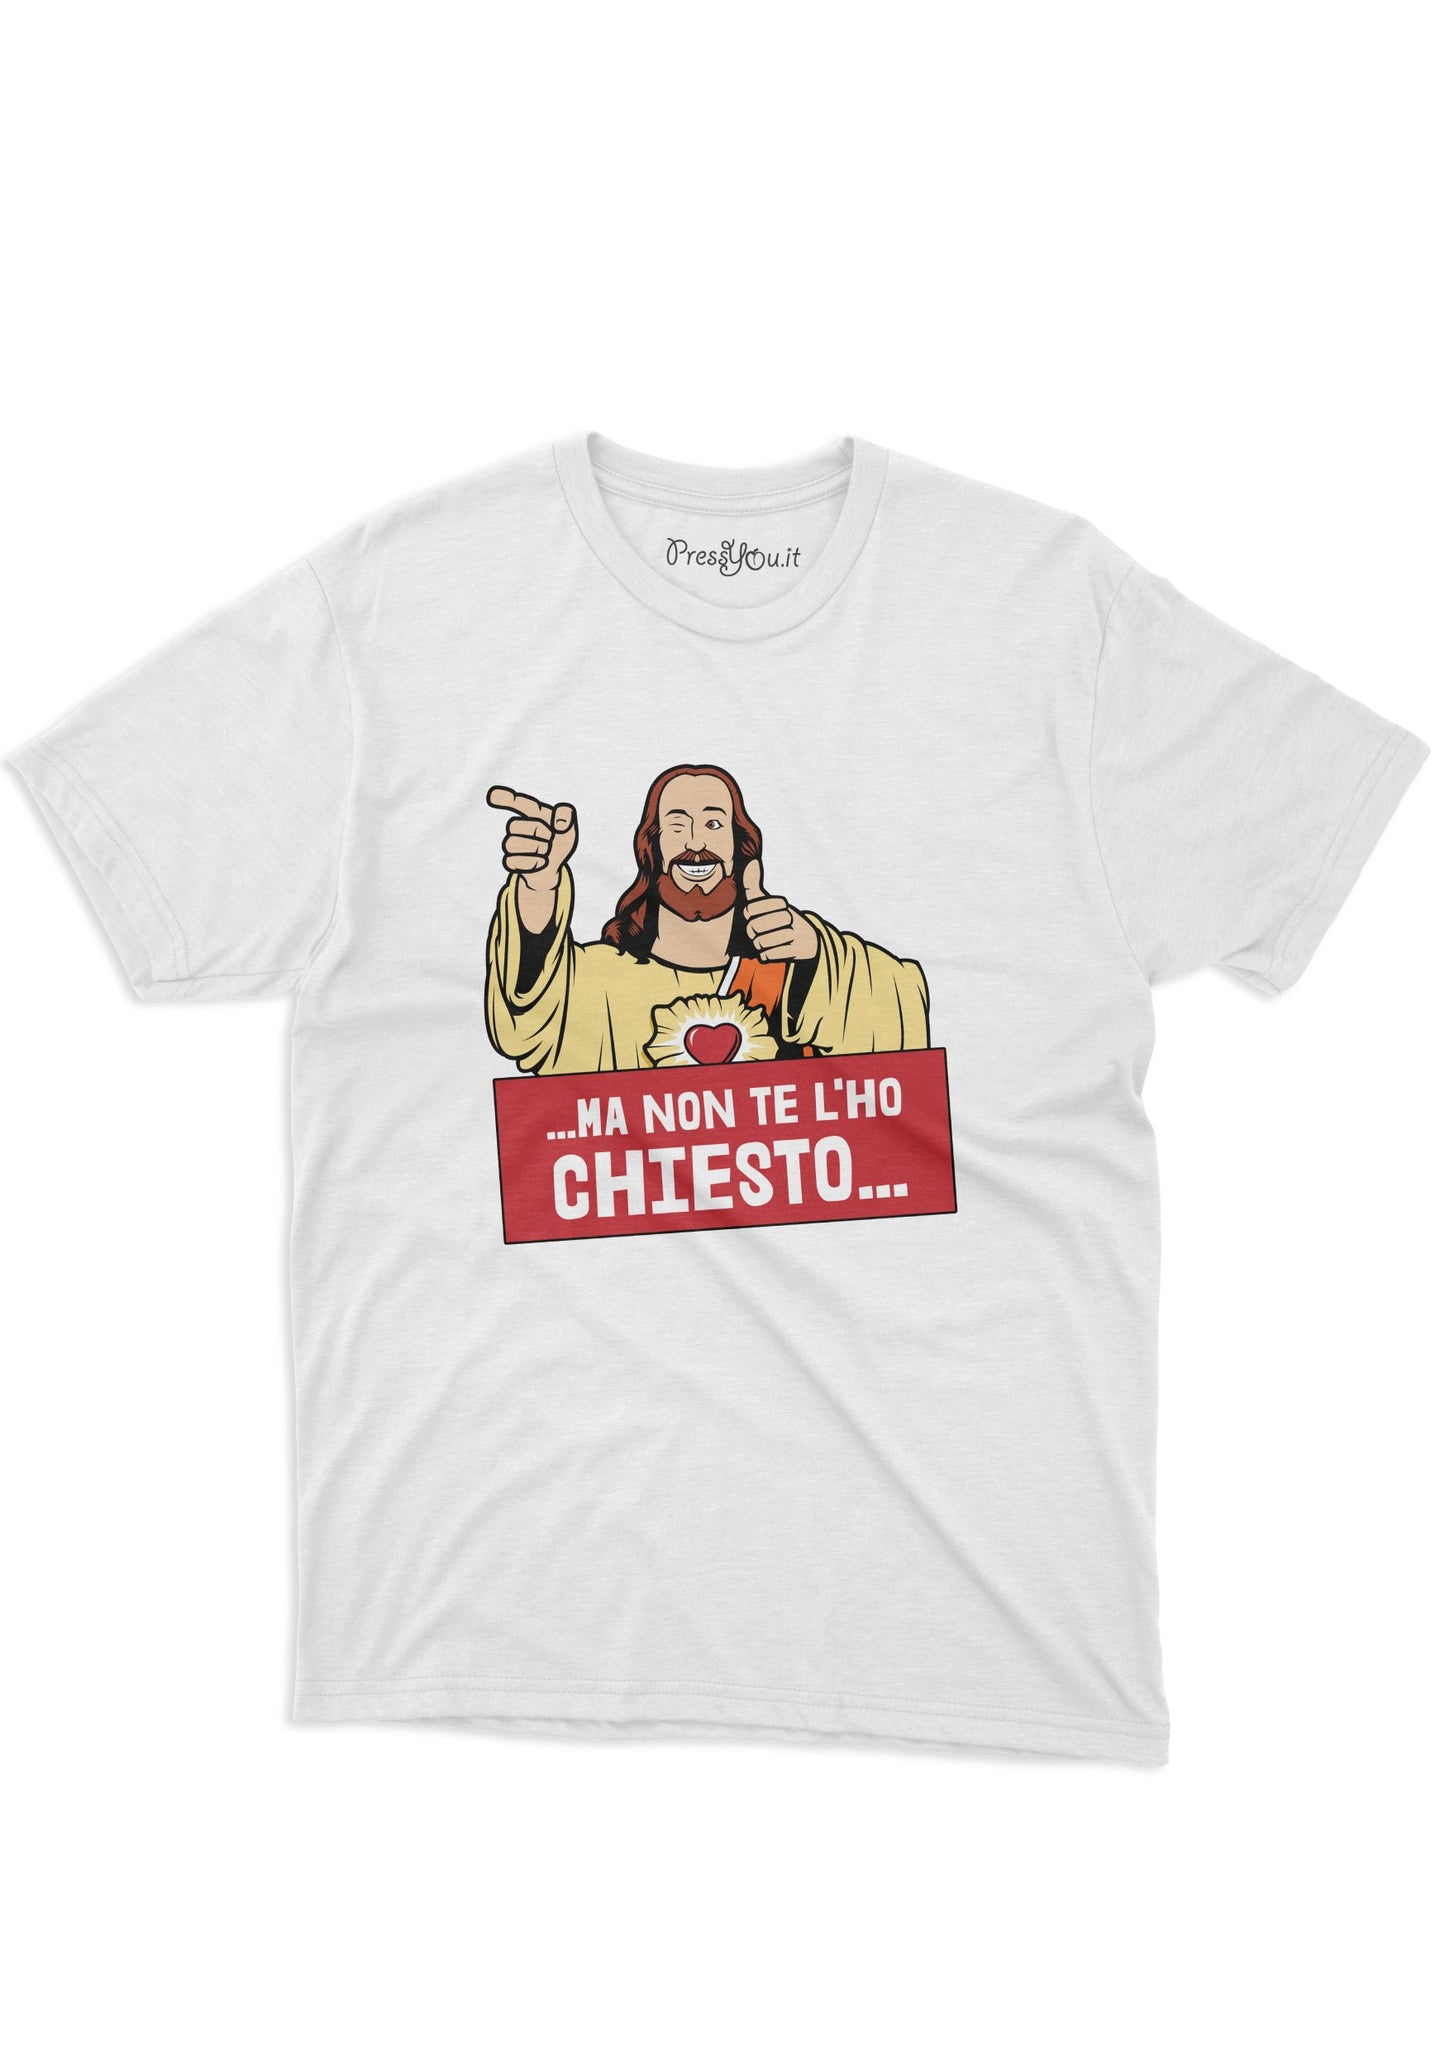 t-shirt t-shirt - but I didn't ask you Christ comrade funny gift idea